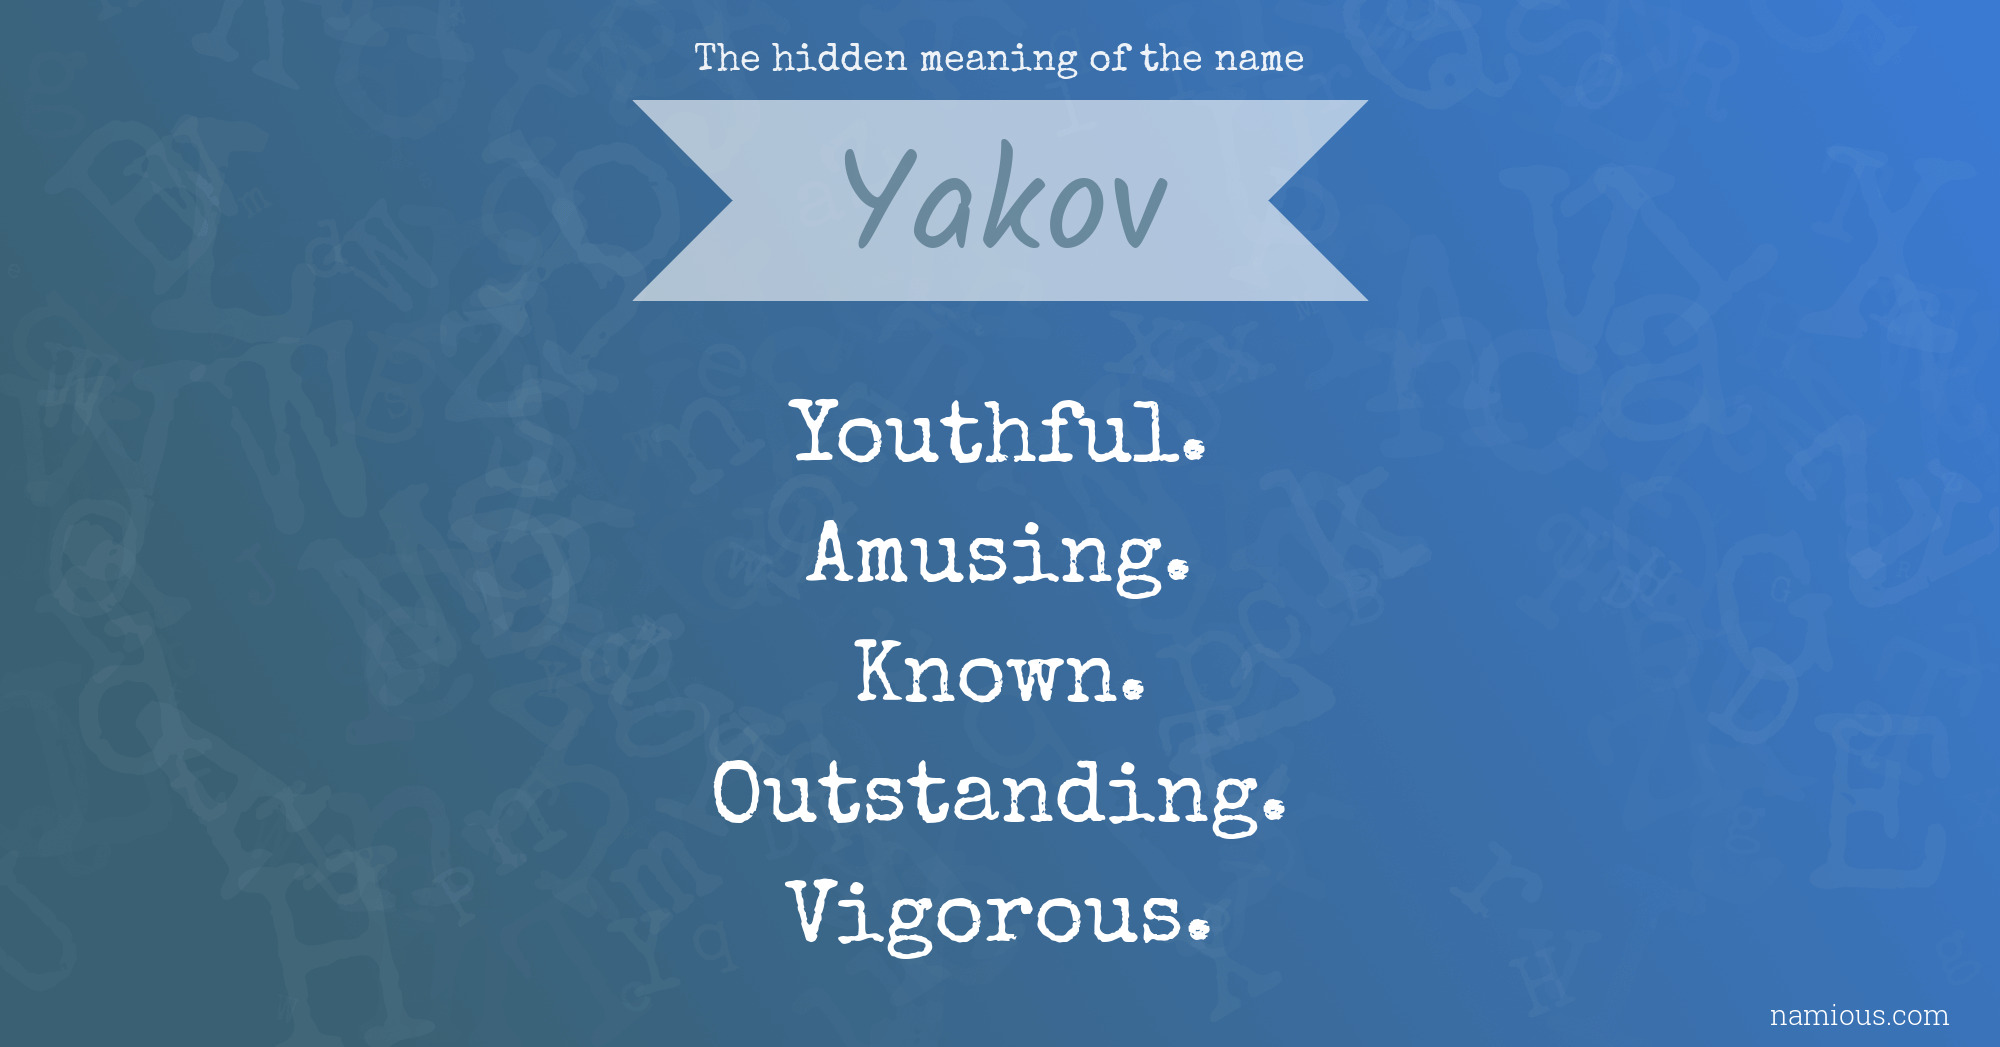 The hidden meaning of the name Yakov